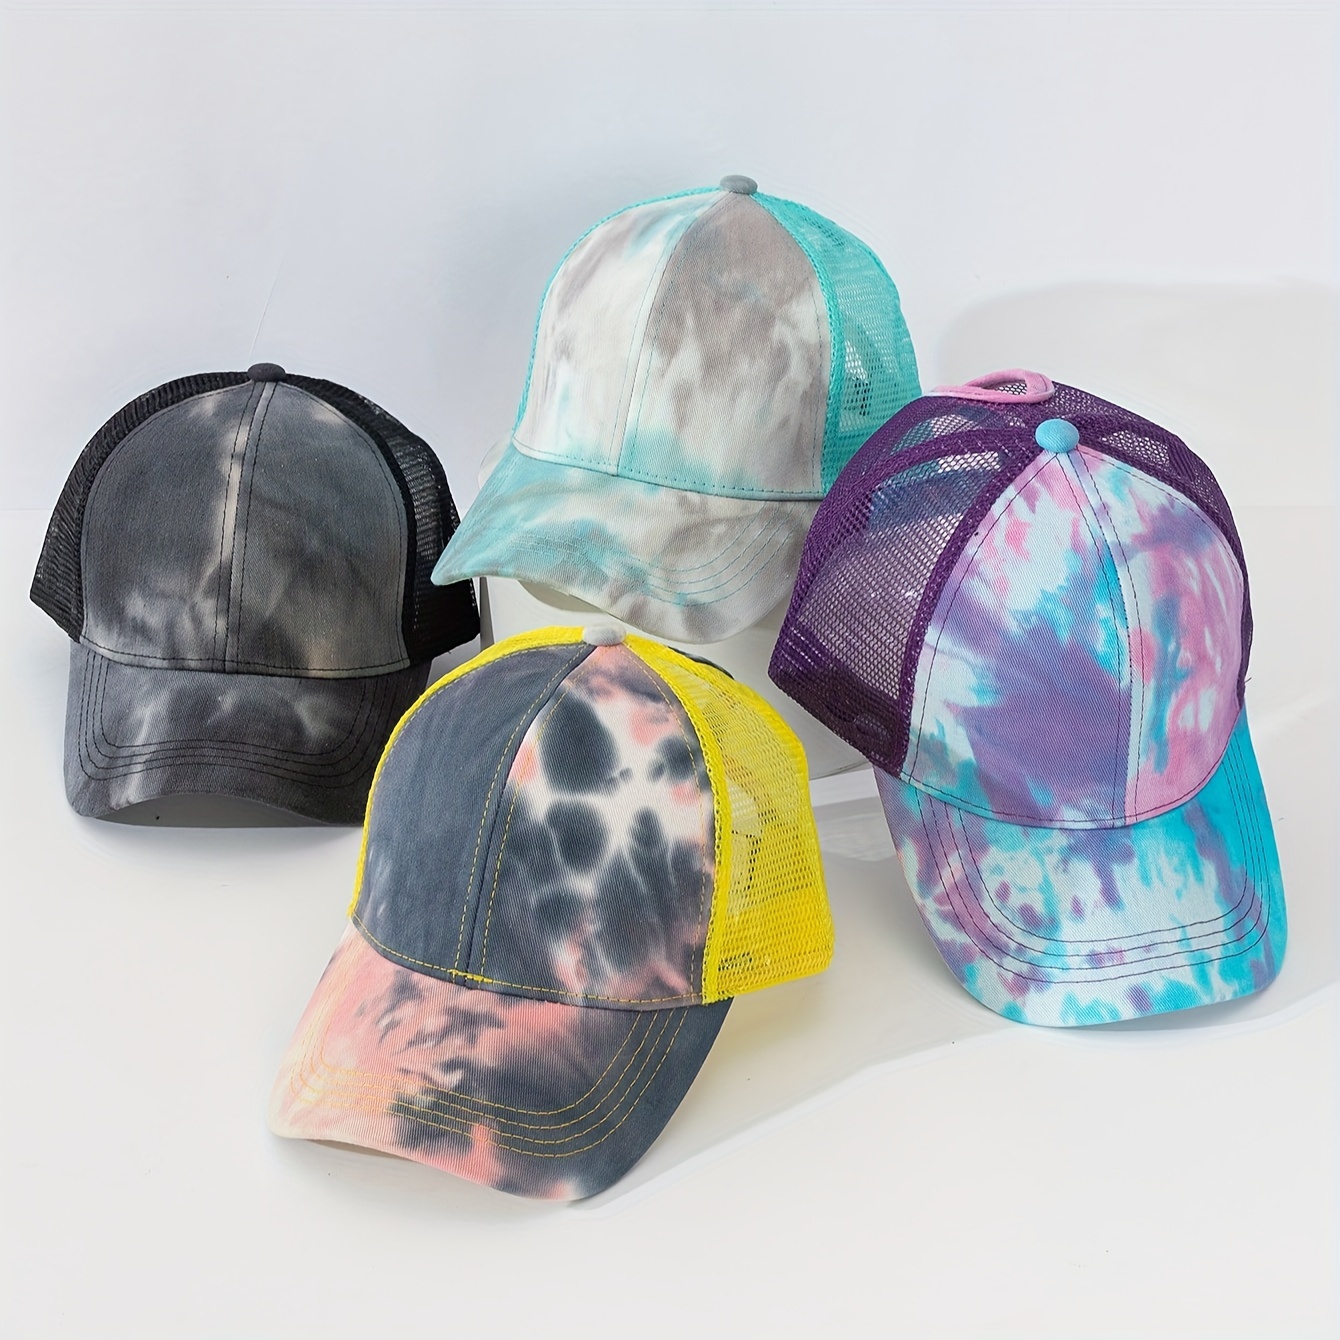 

Women's Tie-dye Baseball Cap, Breathable Mesh Back Trucker Hat With Ponytail Hole, Adjustable Dad Hats For Daily Wear, Travel, Sports